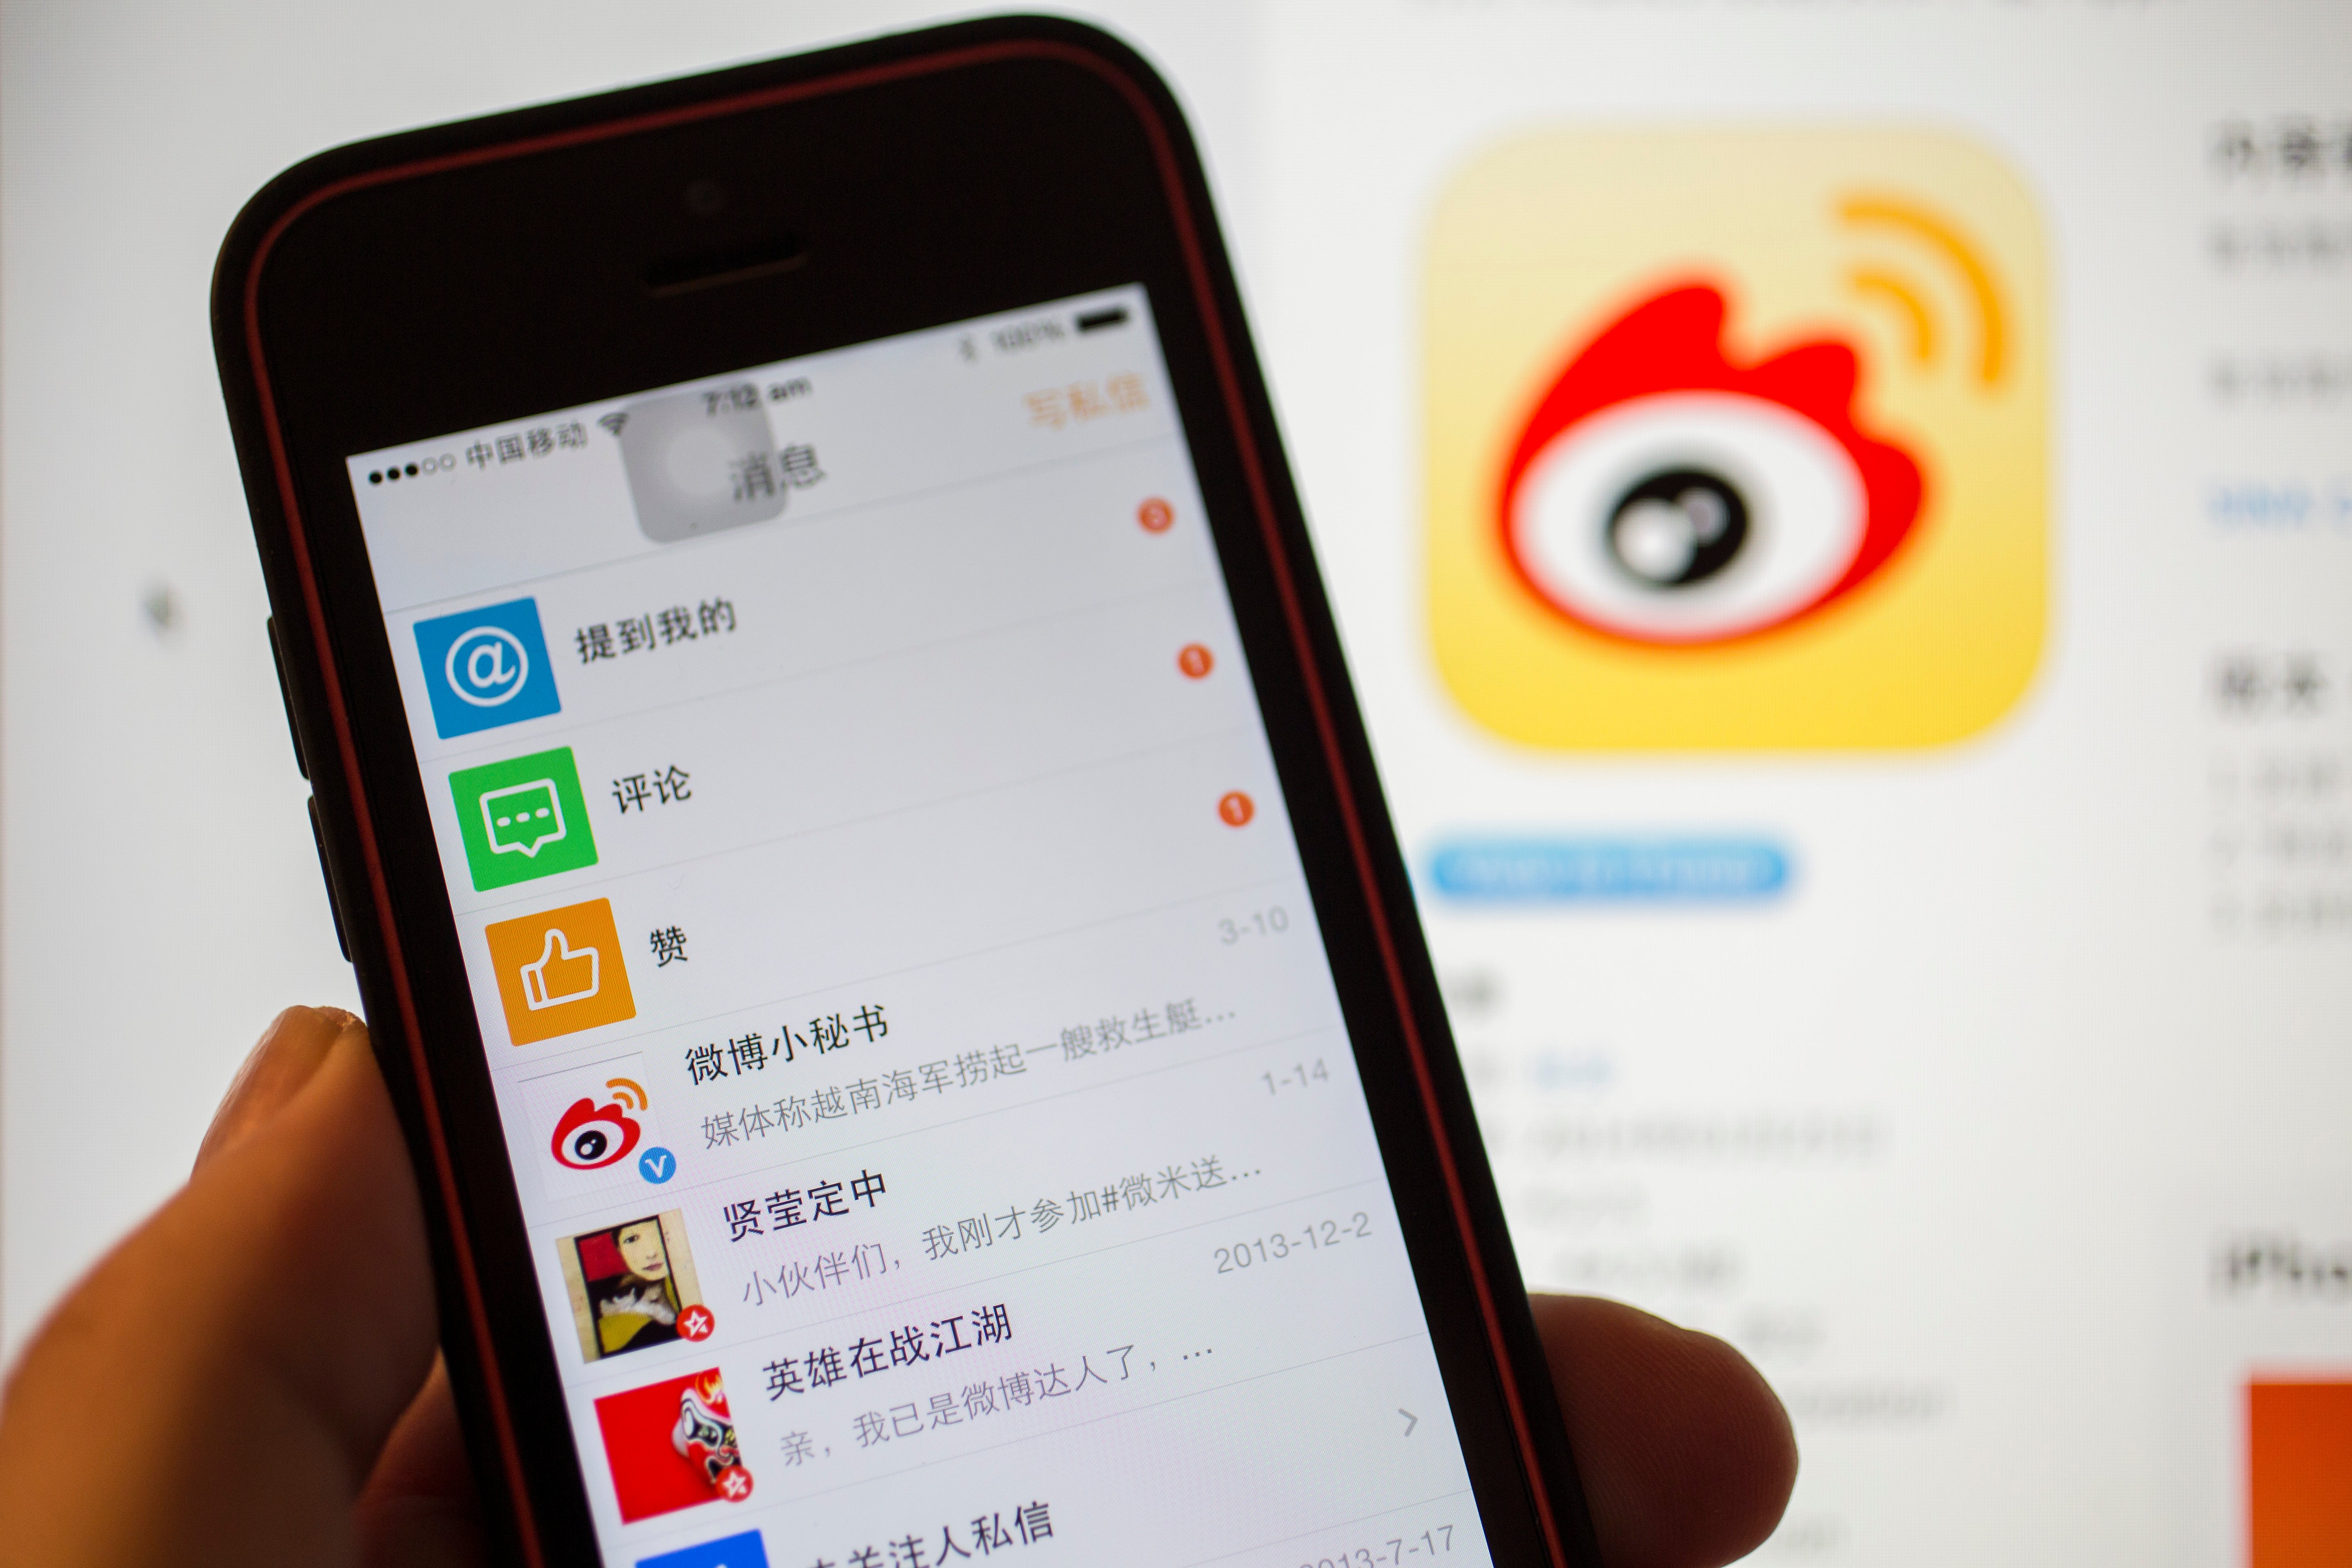 Weibo has been awash with debate over China’s democracy white paper